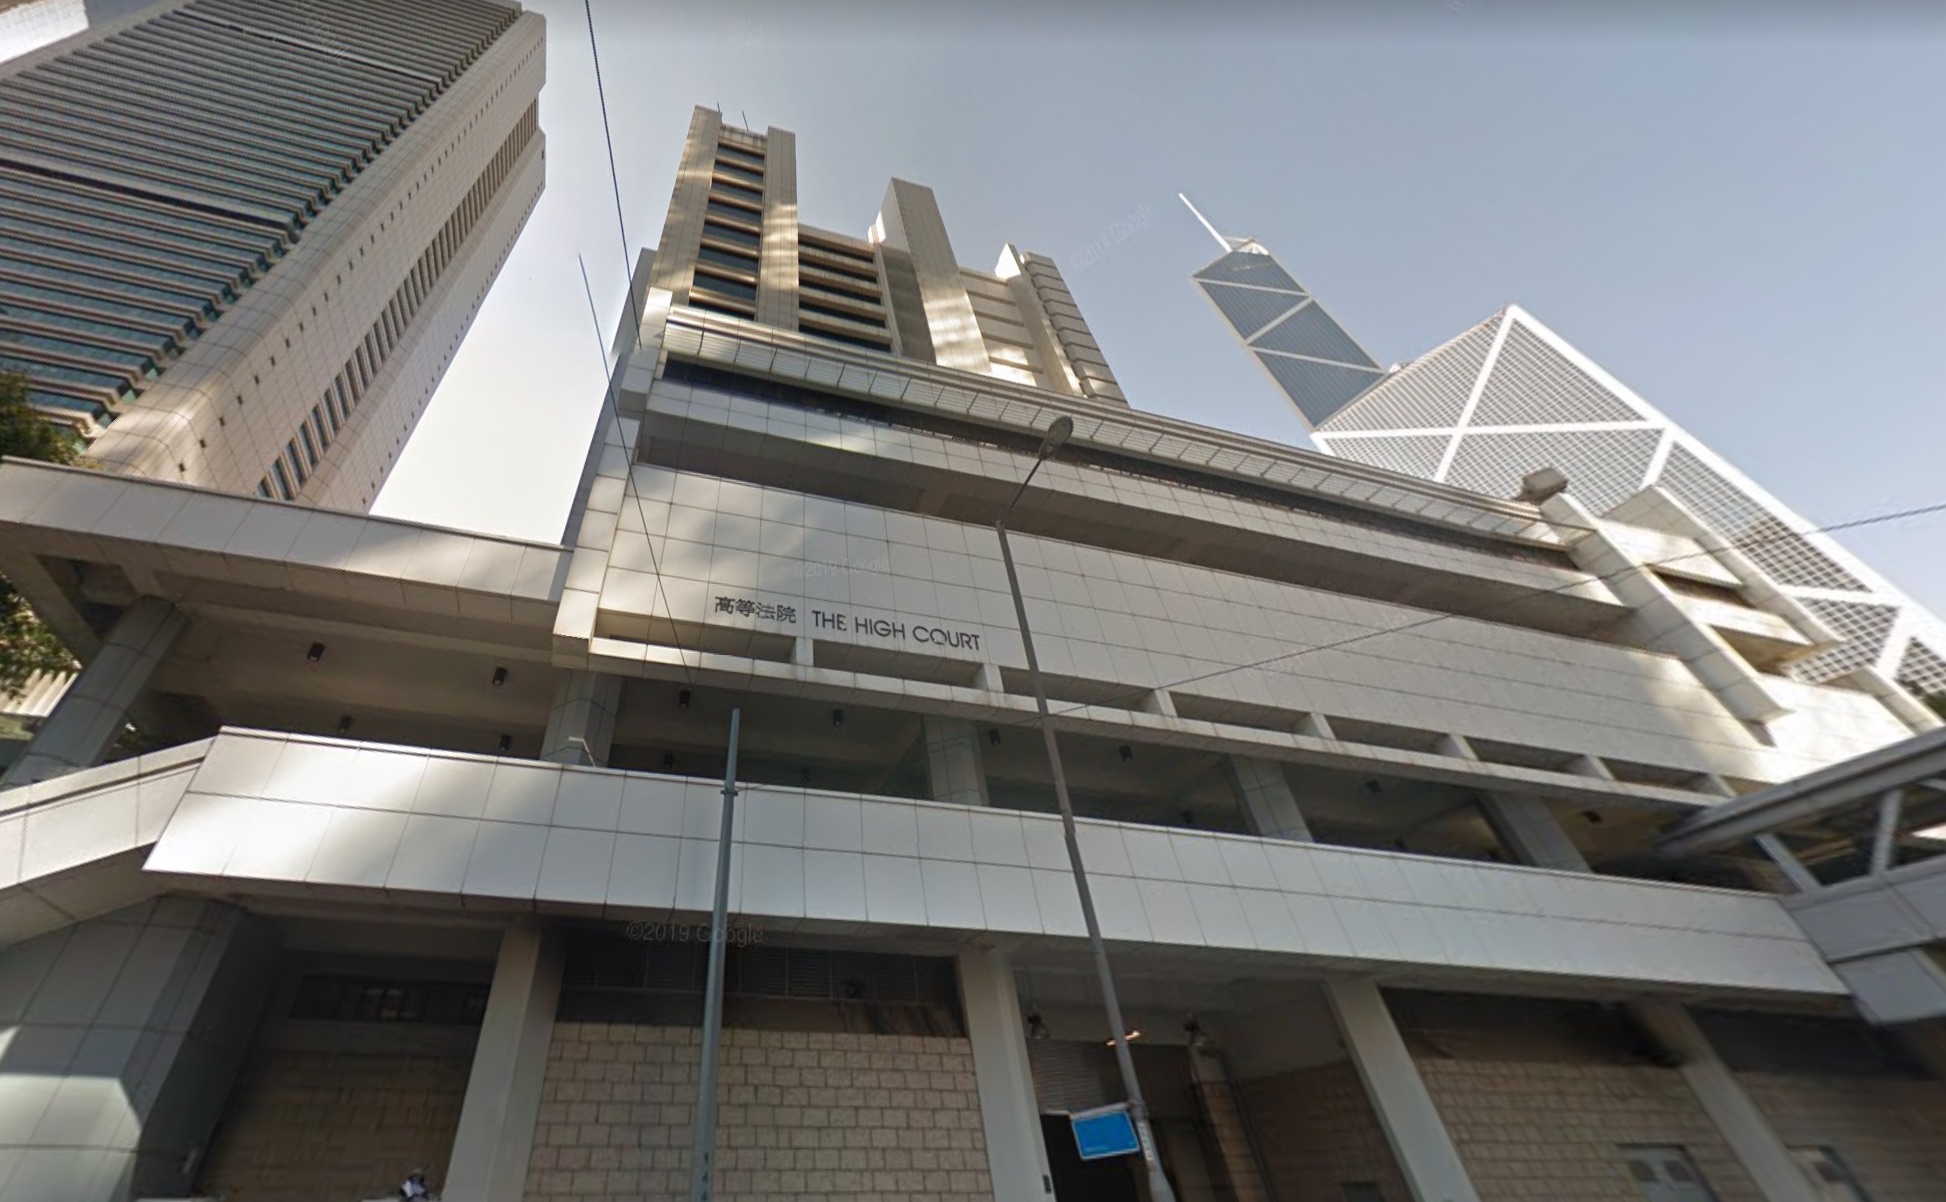 Hong Kong’s High Court, which houses the Court of First Instance. Photo via Google Maps.